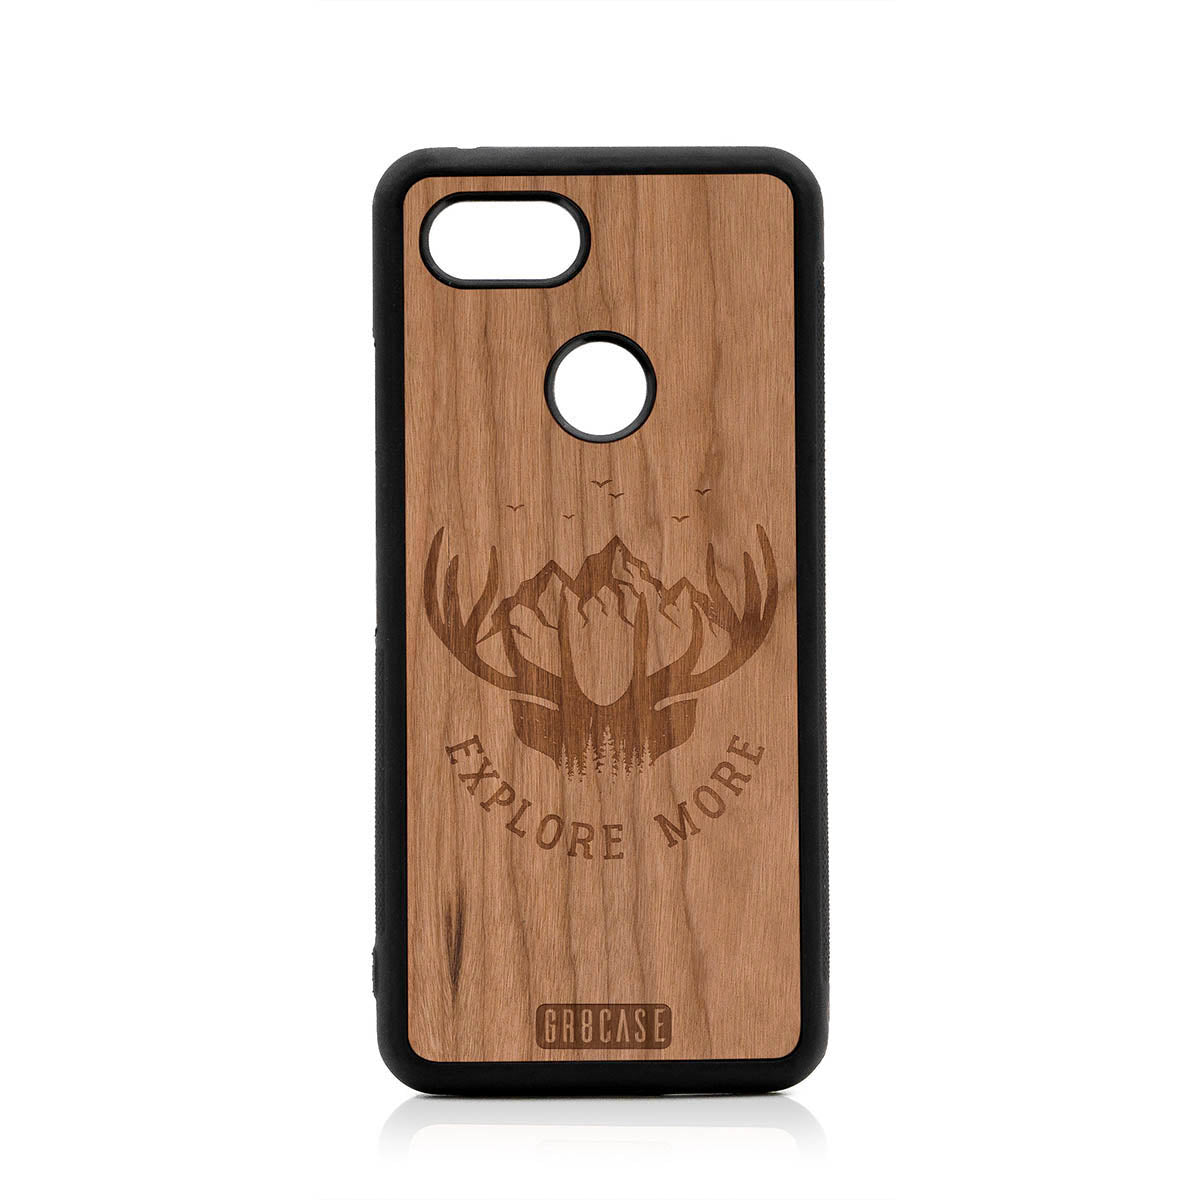 Explore More (Forest, Mountains & Antlers) Design Wood Case For Google Pixel 3 by GR8CASE